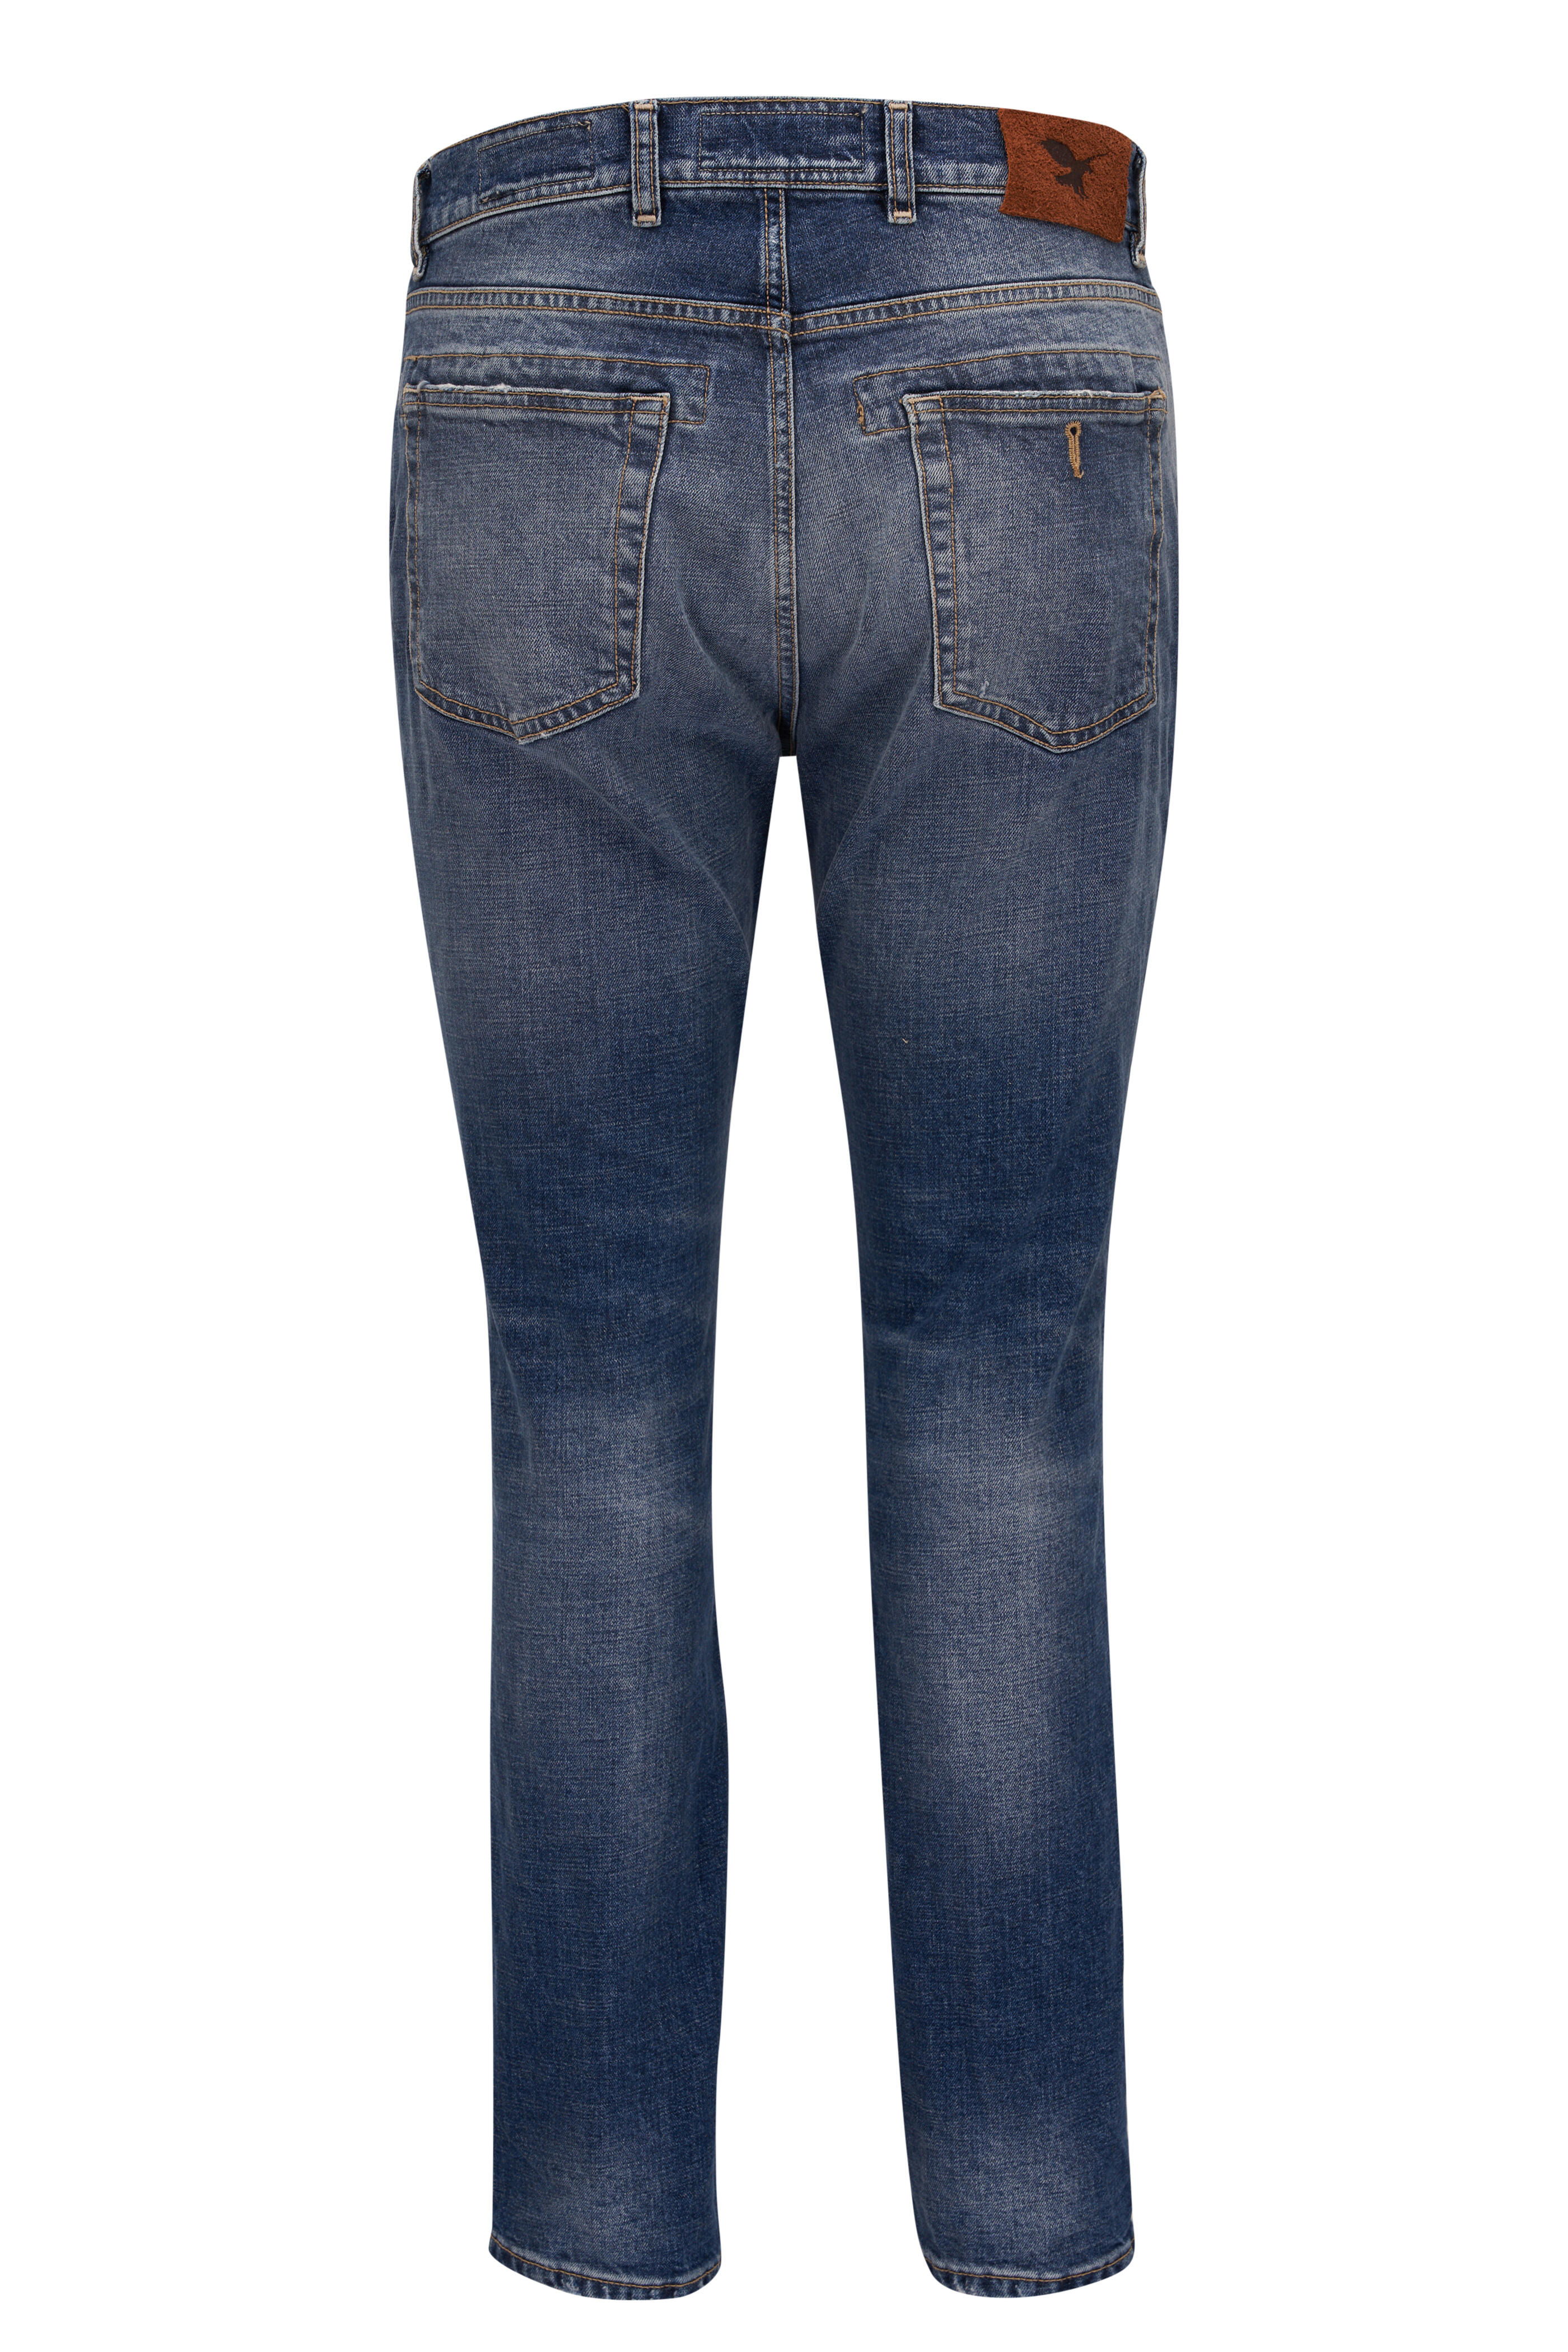 Barmas - Denver Denim Ripped & Repaired Jean | Mitchell Stores